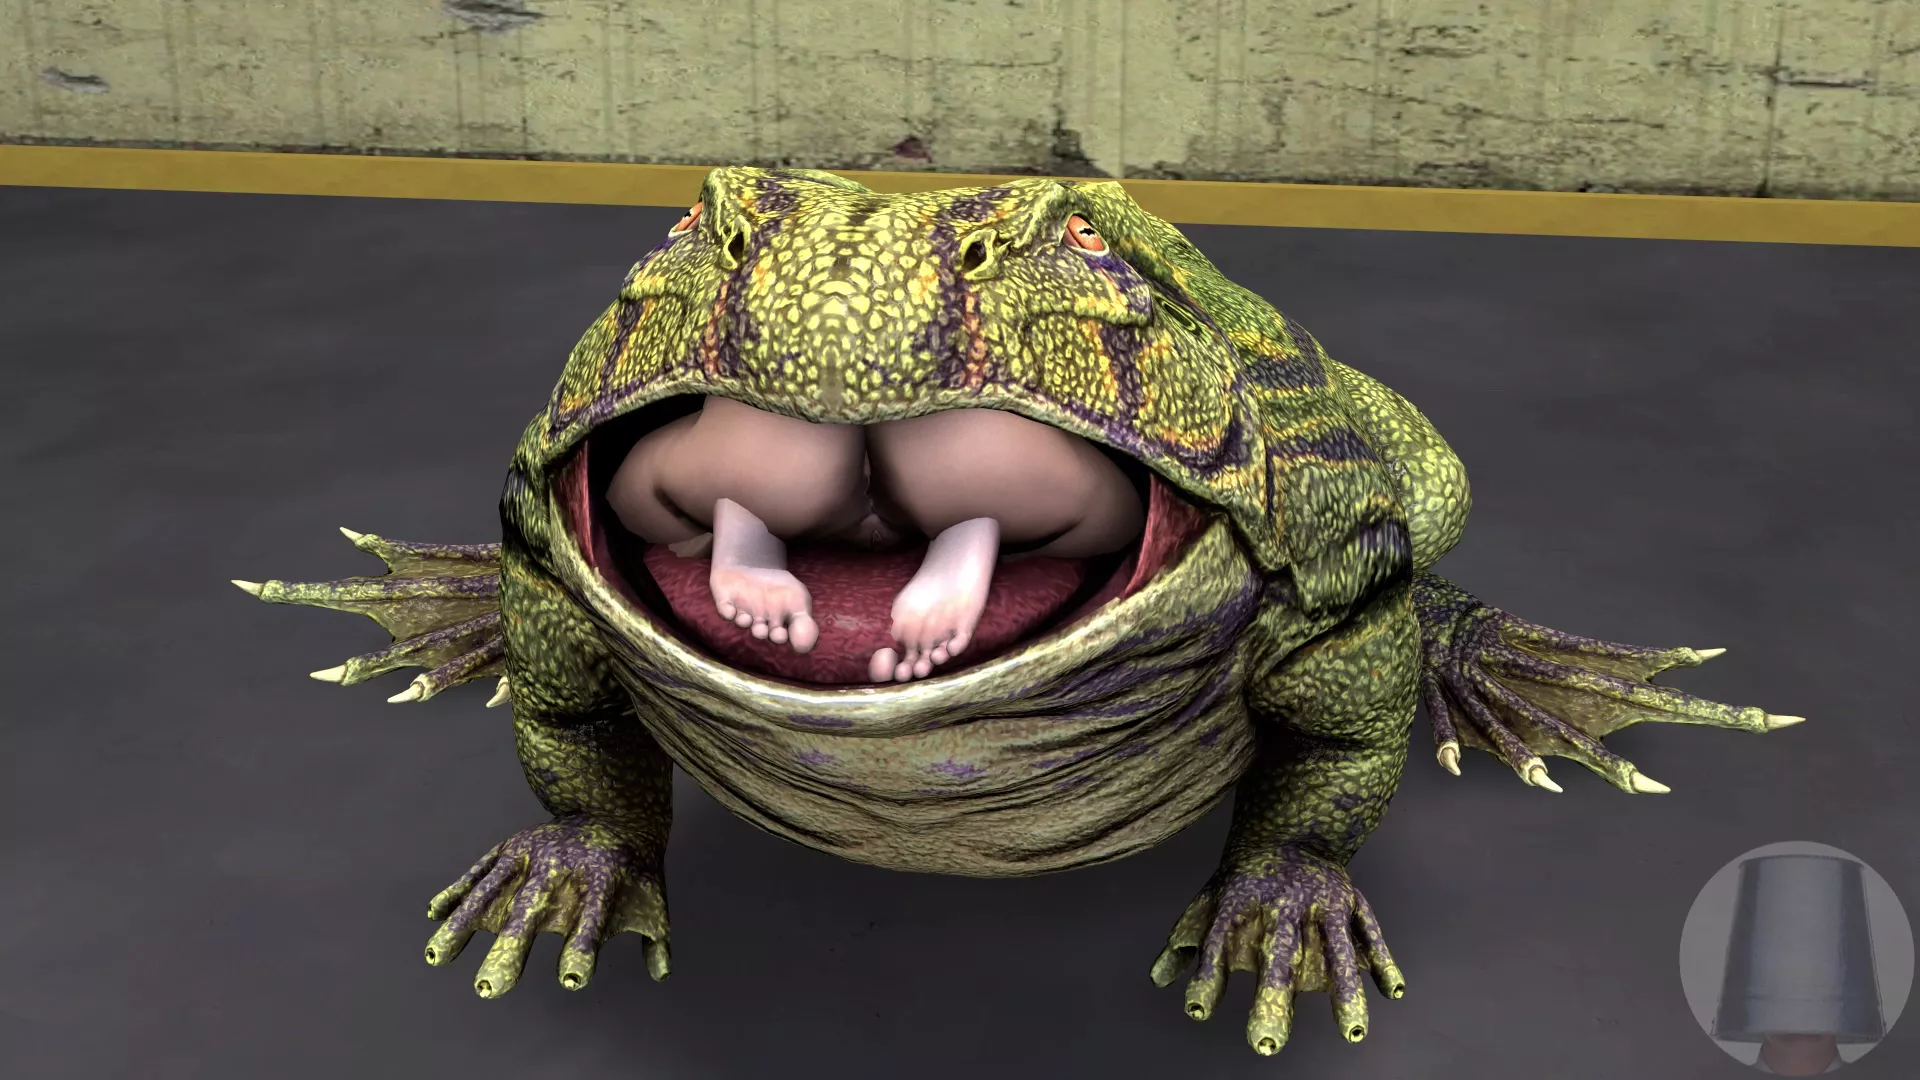 Frog Vore Porn - Feed the Frog